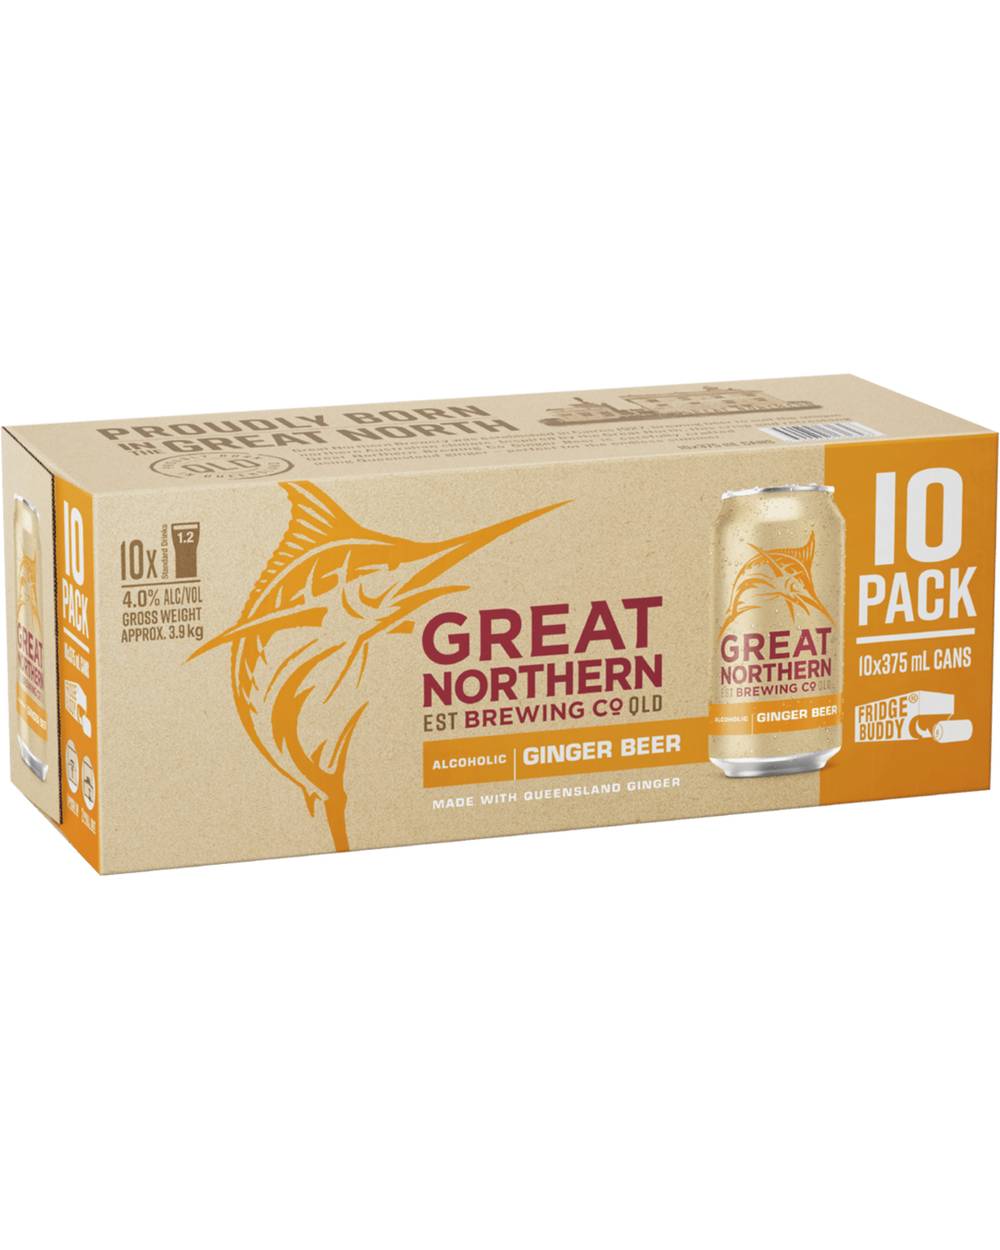 Great Northern Ginger Beer Cans 10x375ml